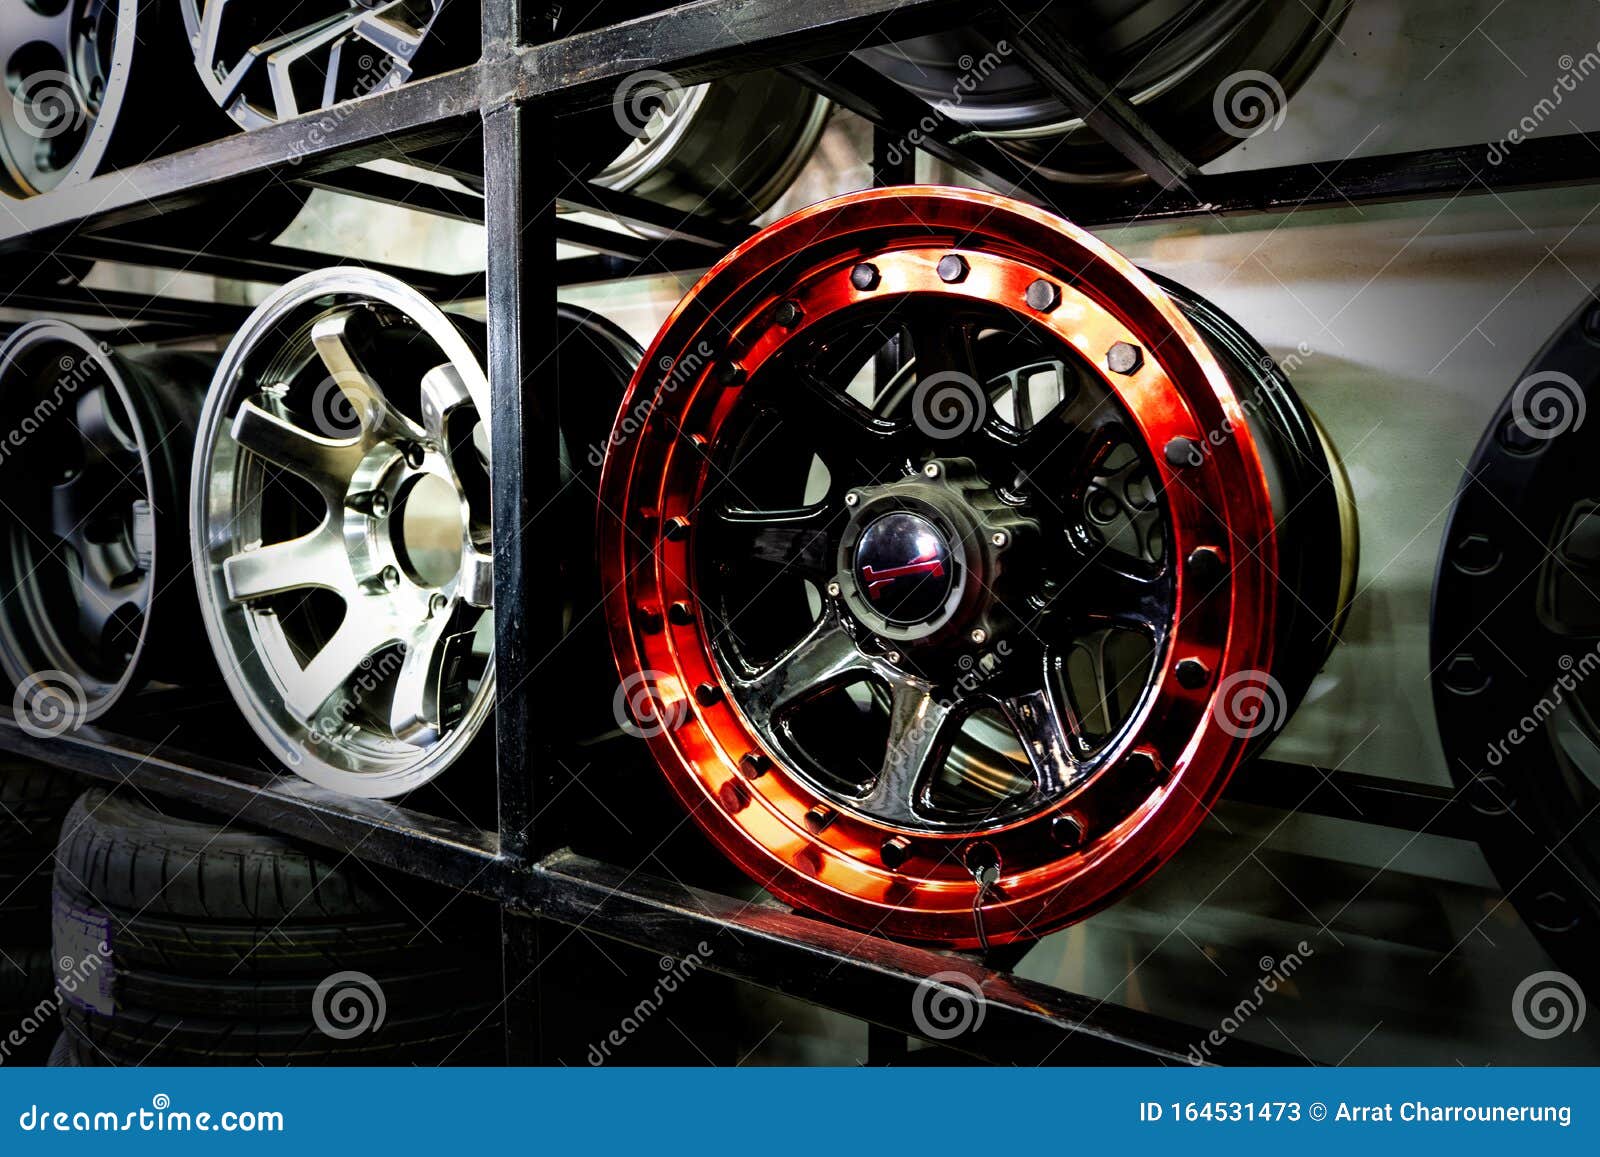 Shelves with Alloy Wheels and Tires in Modern Car Service Centre Stock Image - Image of rubber, design: 164531473